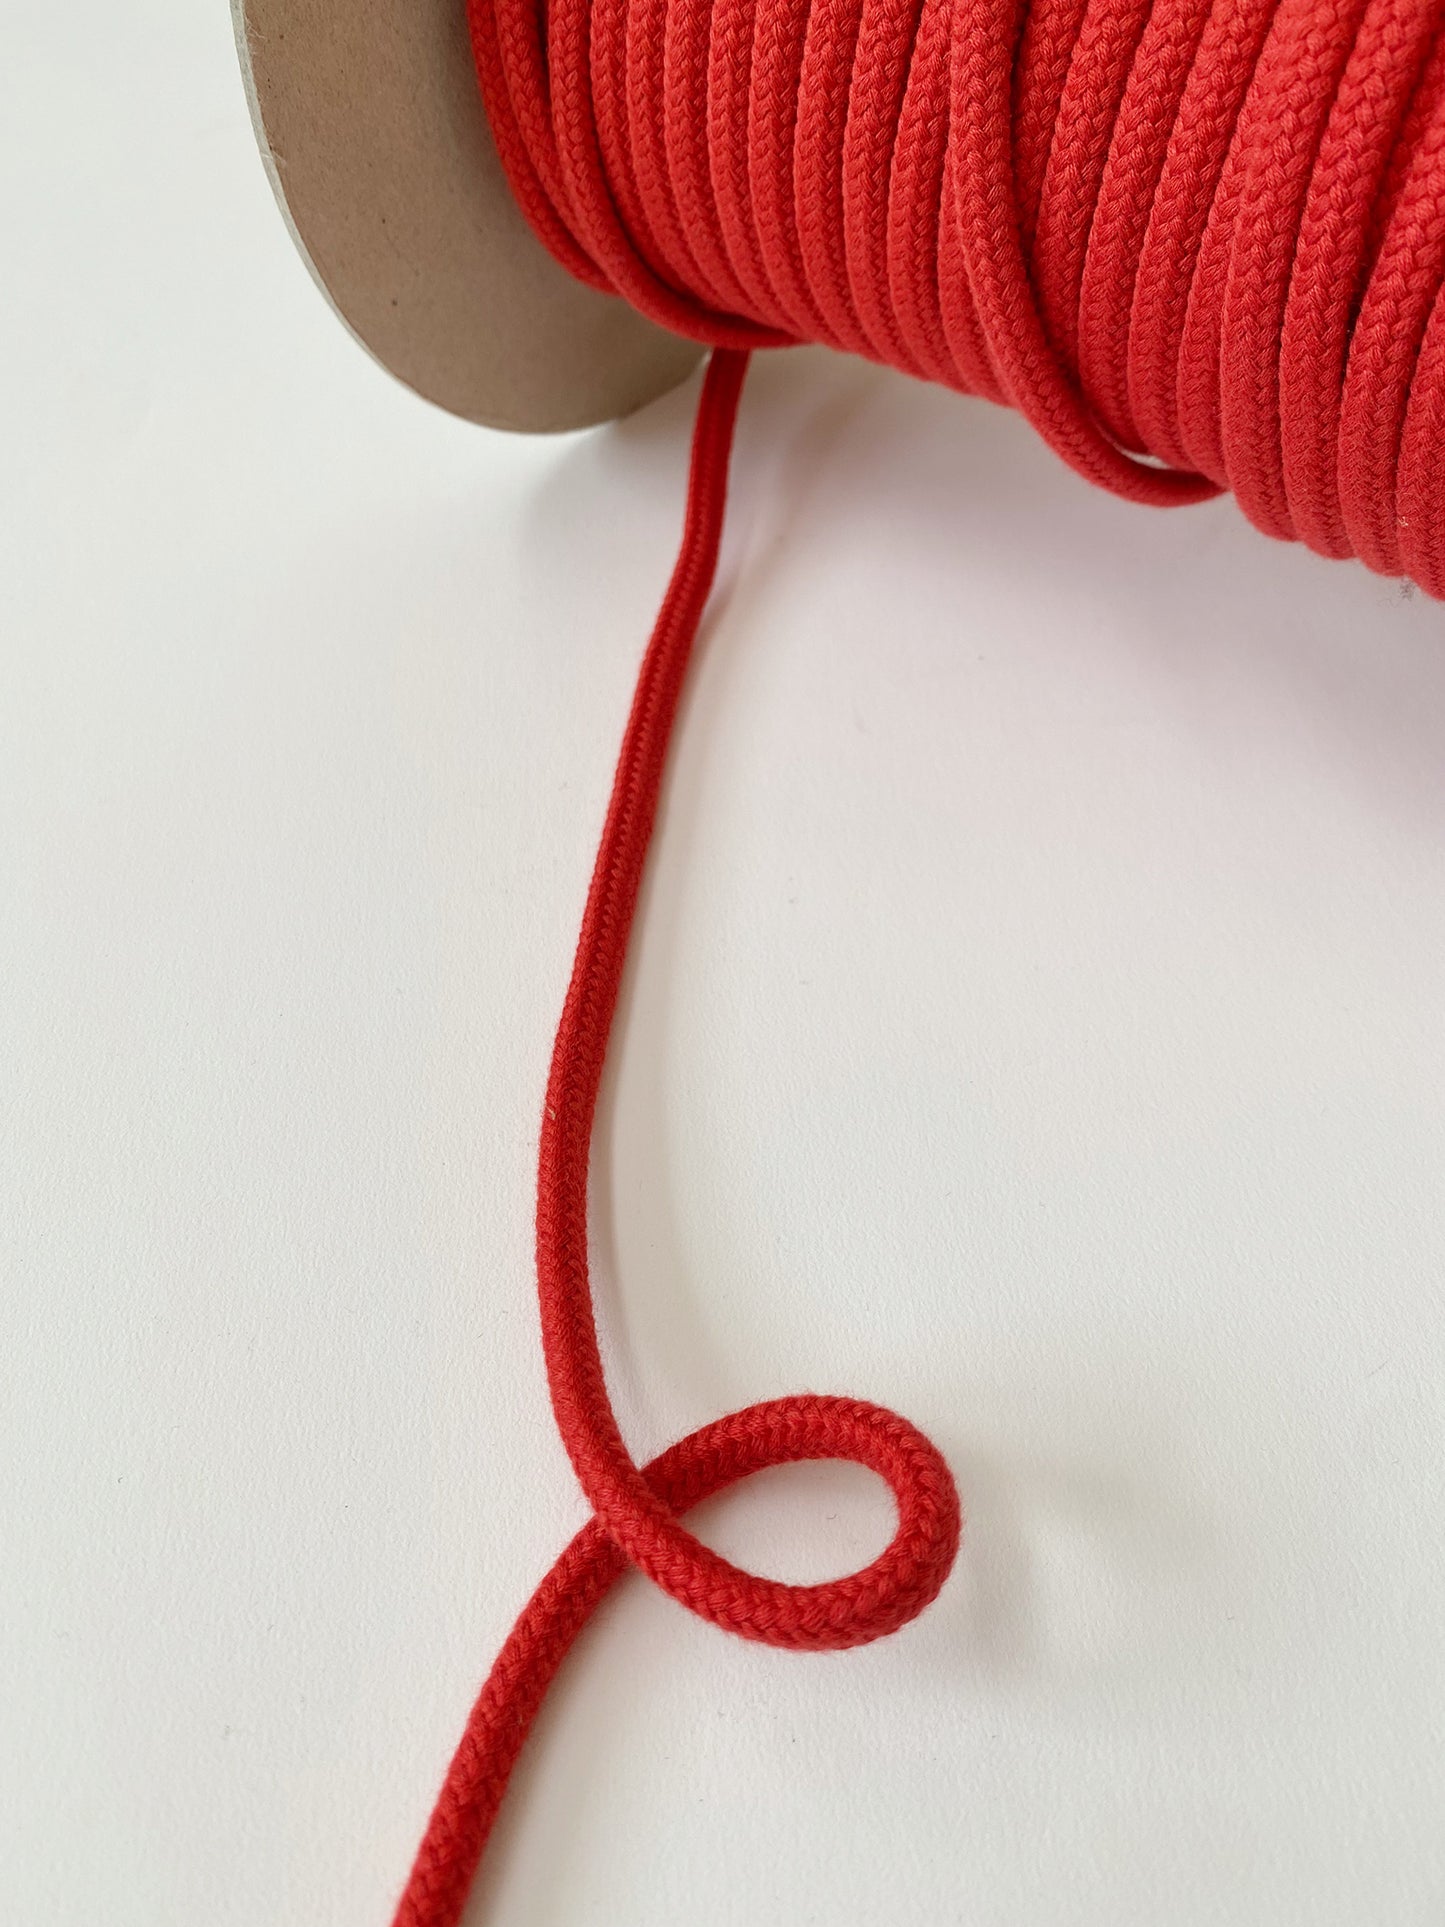 7mm Cord - 100% Cotton - Cherry Red